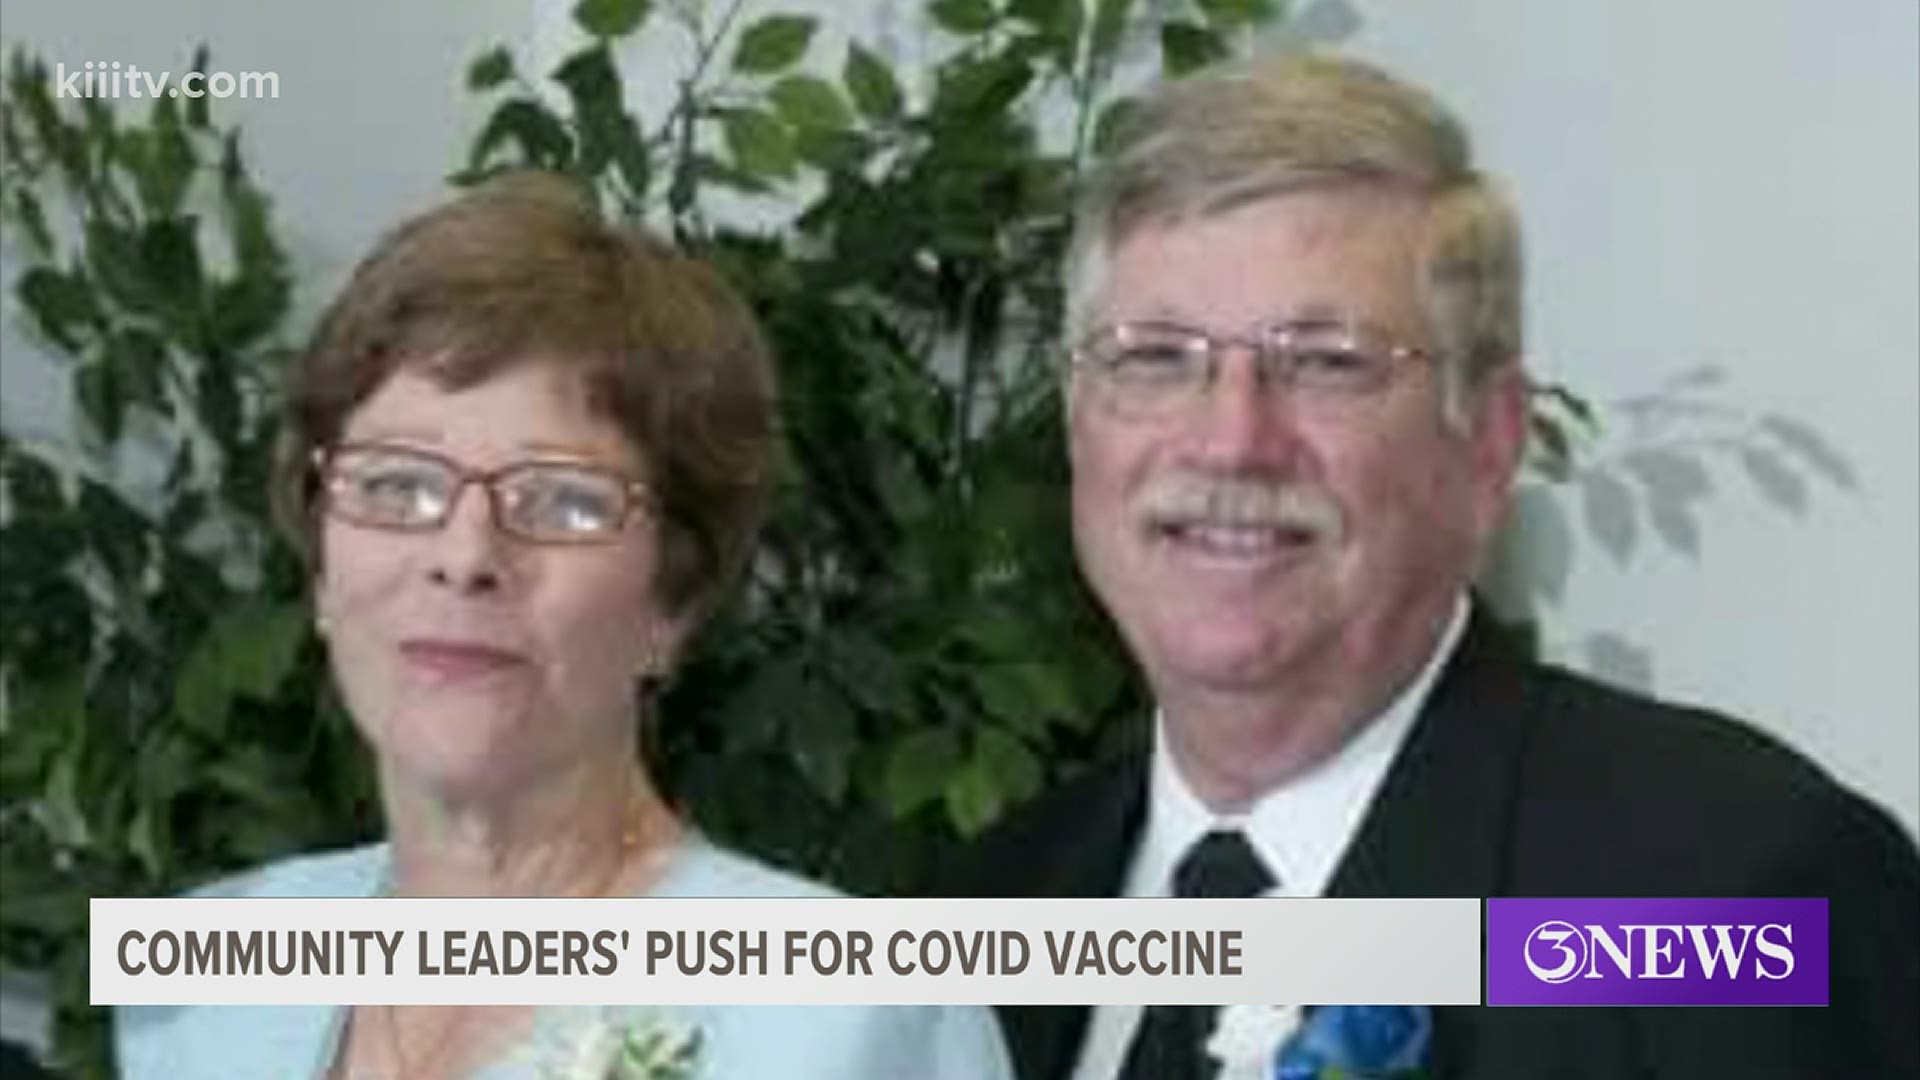 The doctor says it’s important for people to believe in the vaccine so we can stop the spread of COVID-19 and get back to living normal lives.